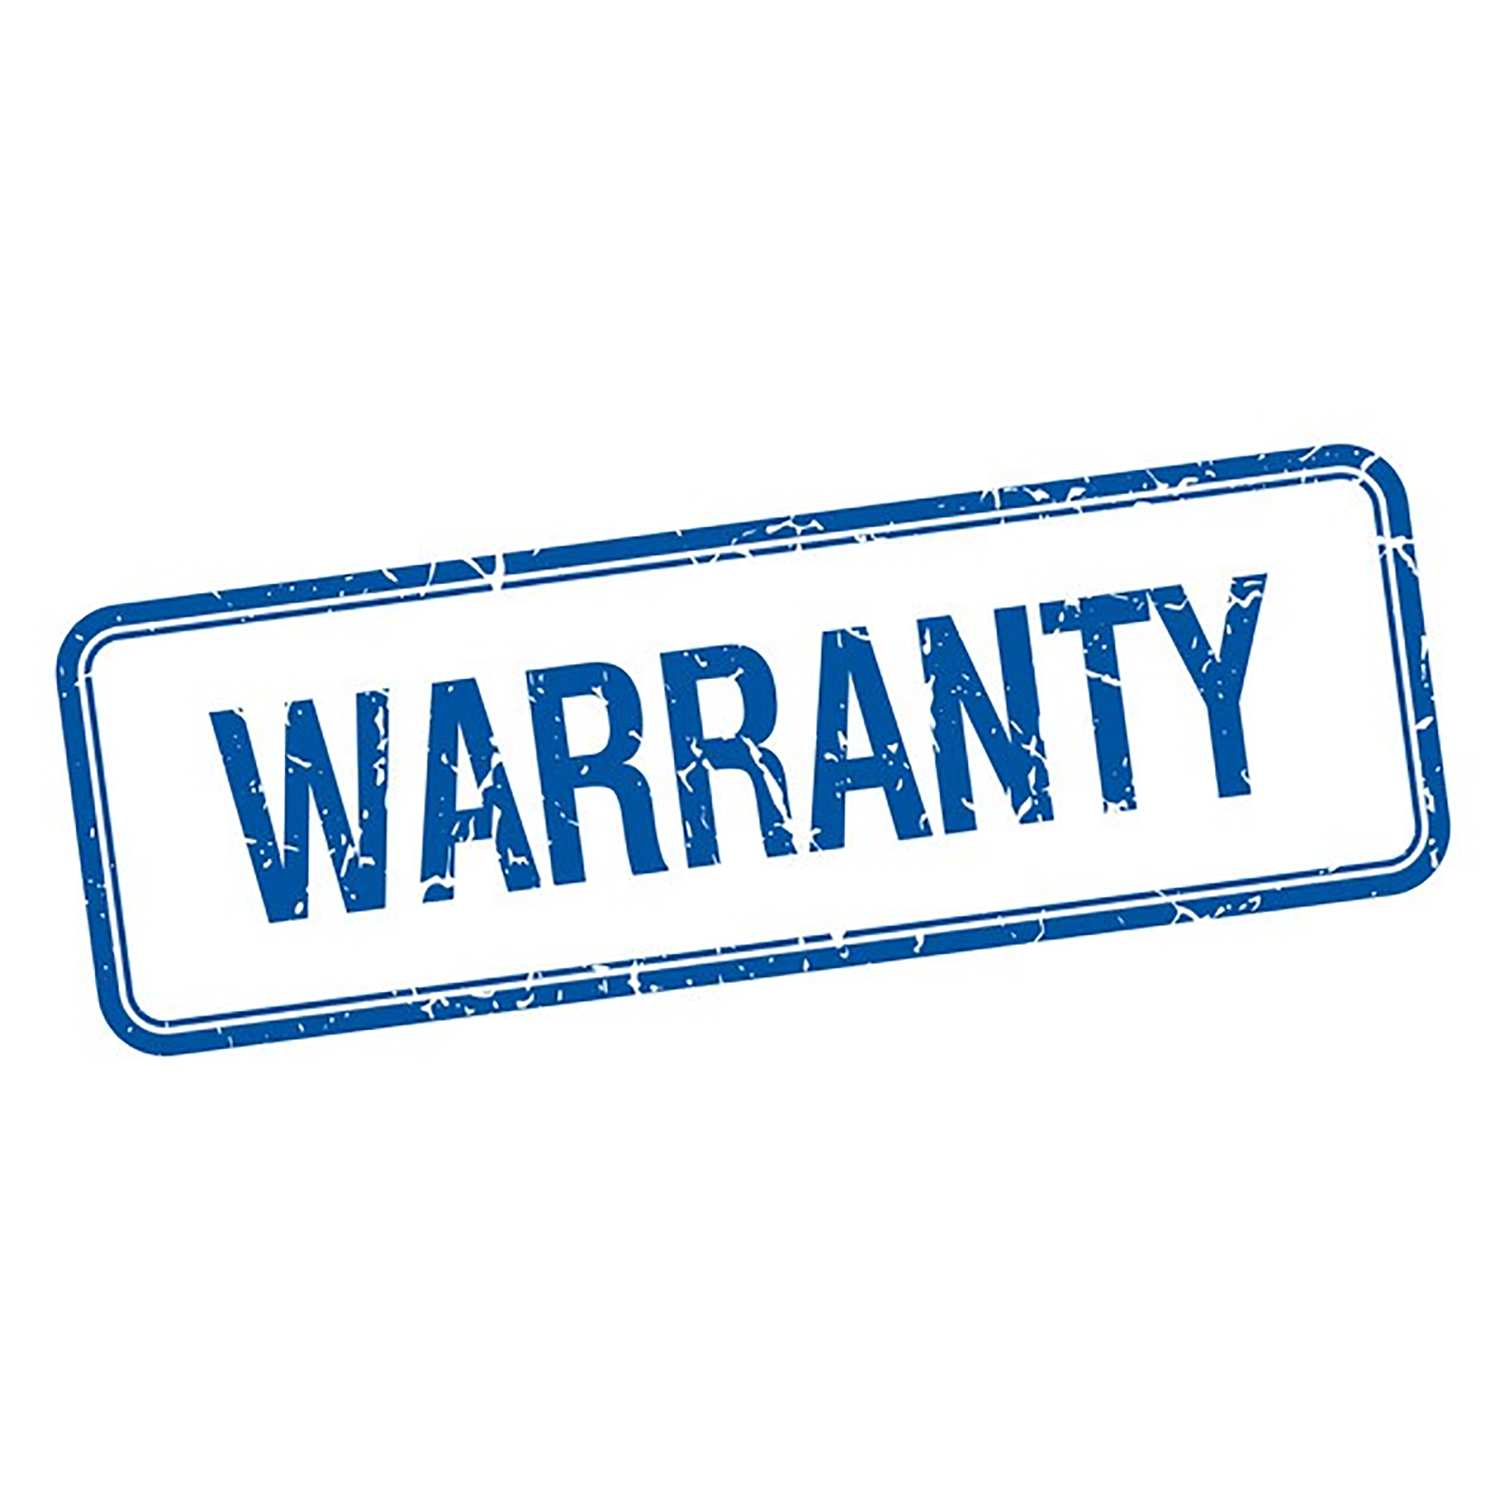 Extended 2 year comprehensive warranty for the seca CT331